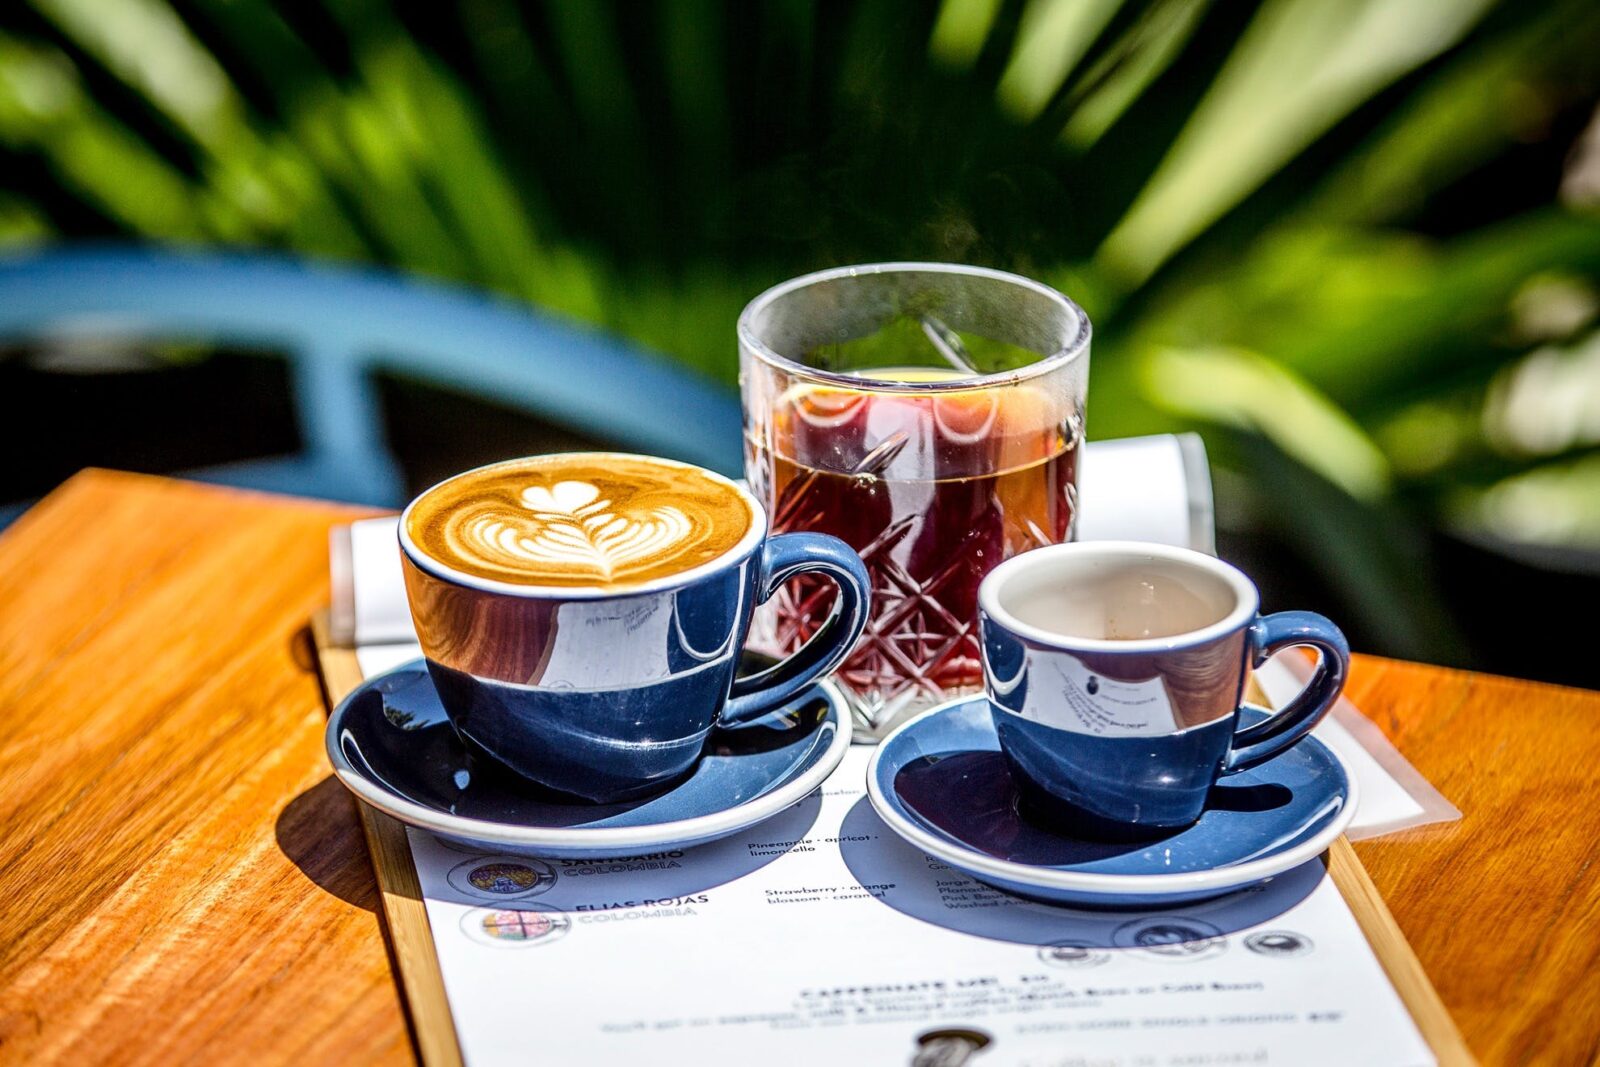 Three coffees - Latte, Filter Coffee and Espresso - Barista's choice - Explore the taste of coffee